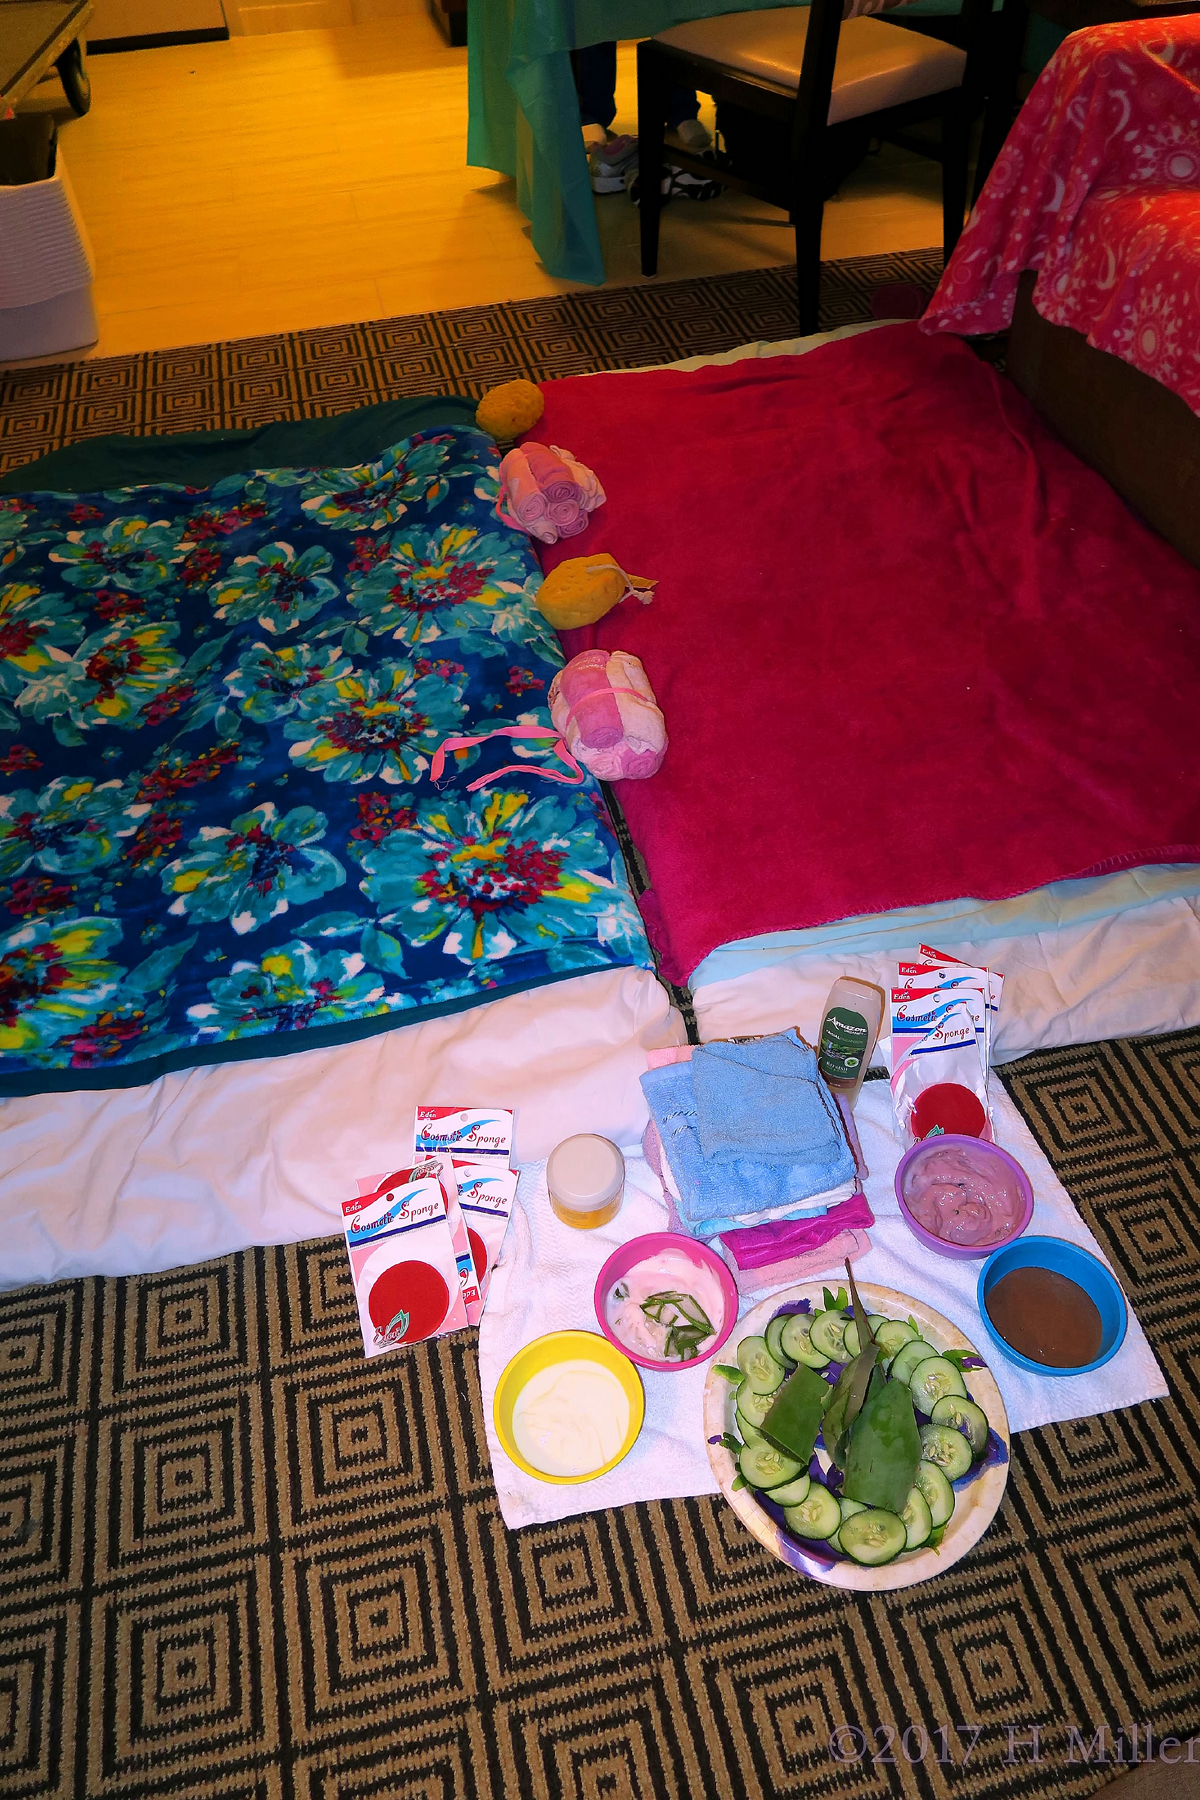 The Kids Facials Ingredients And Area Ready For Spa Treatments.